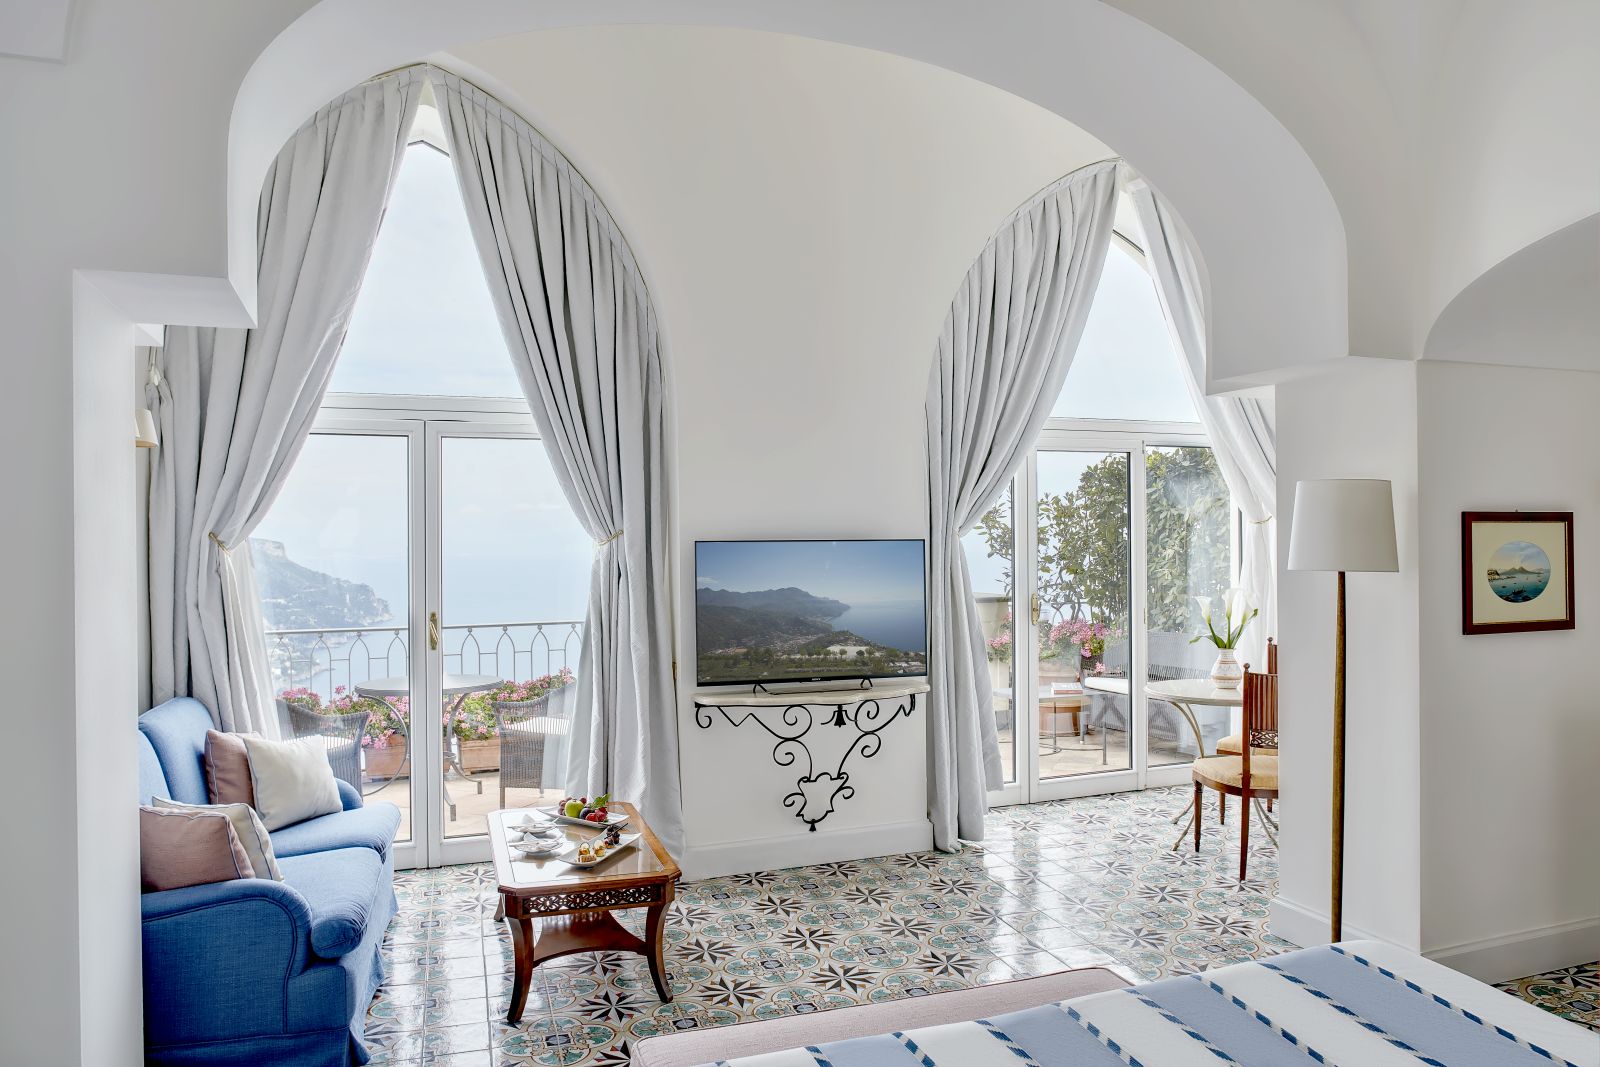 Guest room and terrace view at Belmond Hotel Caruso in Ravello Italy